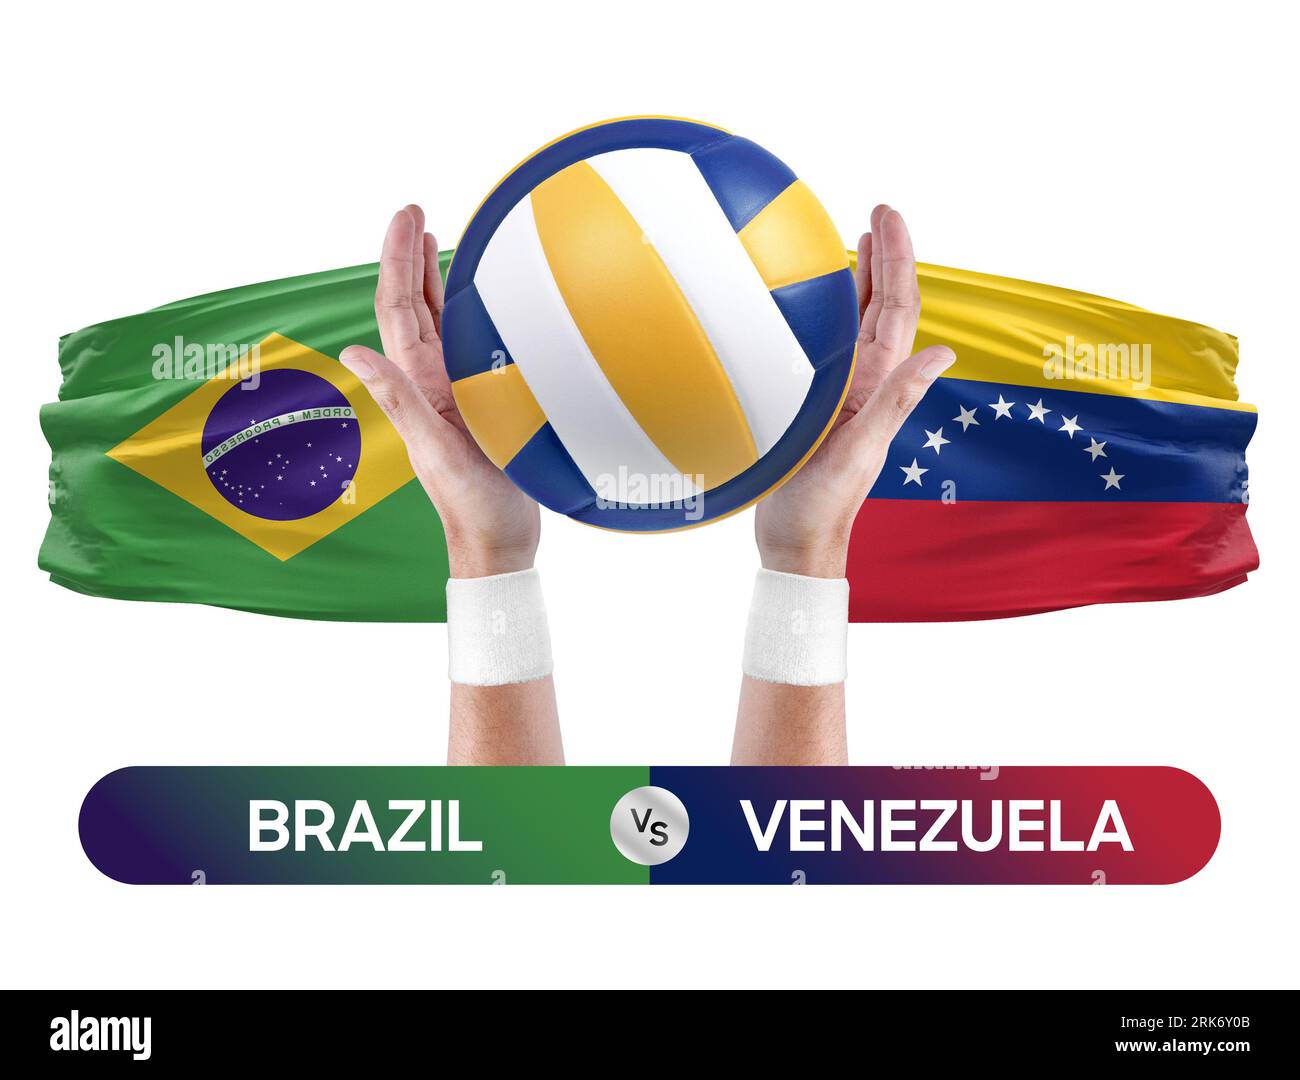 Brazil vs Venezuela national teams volleyball volley ball match competition concept. Stock Photo